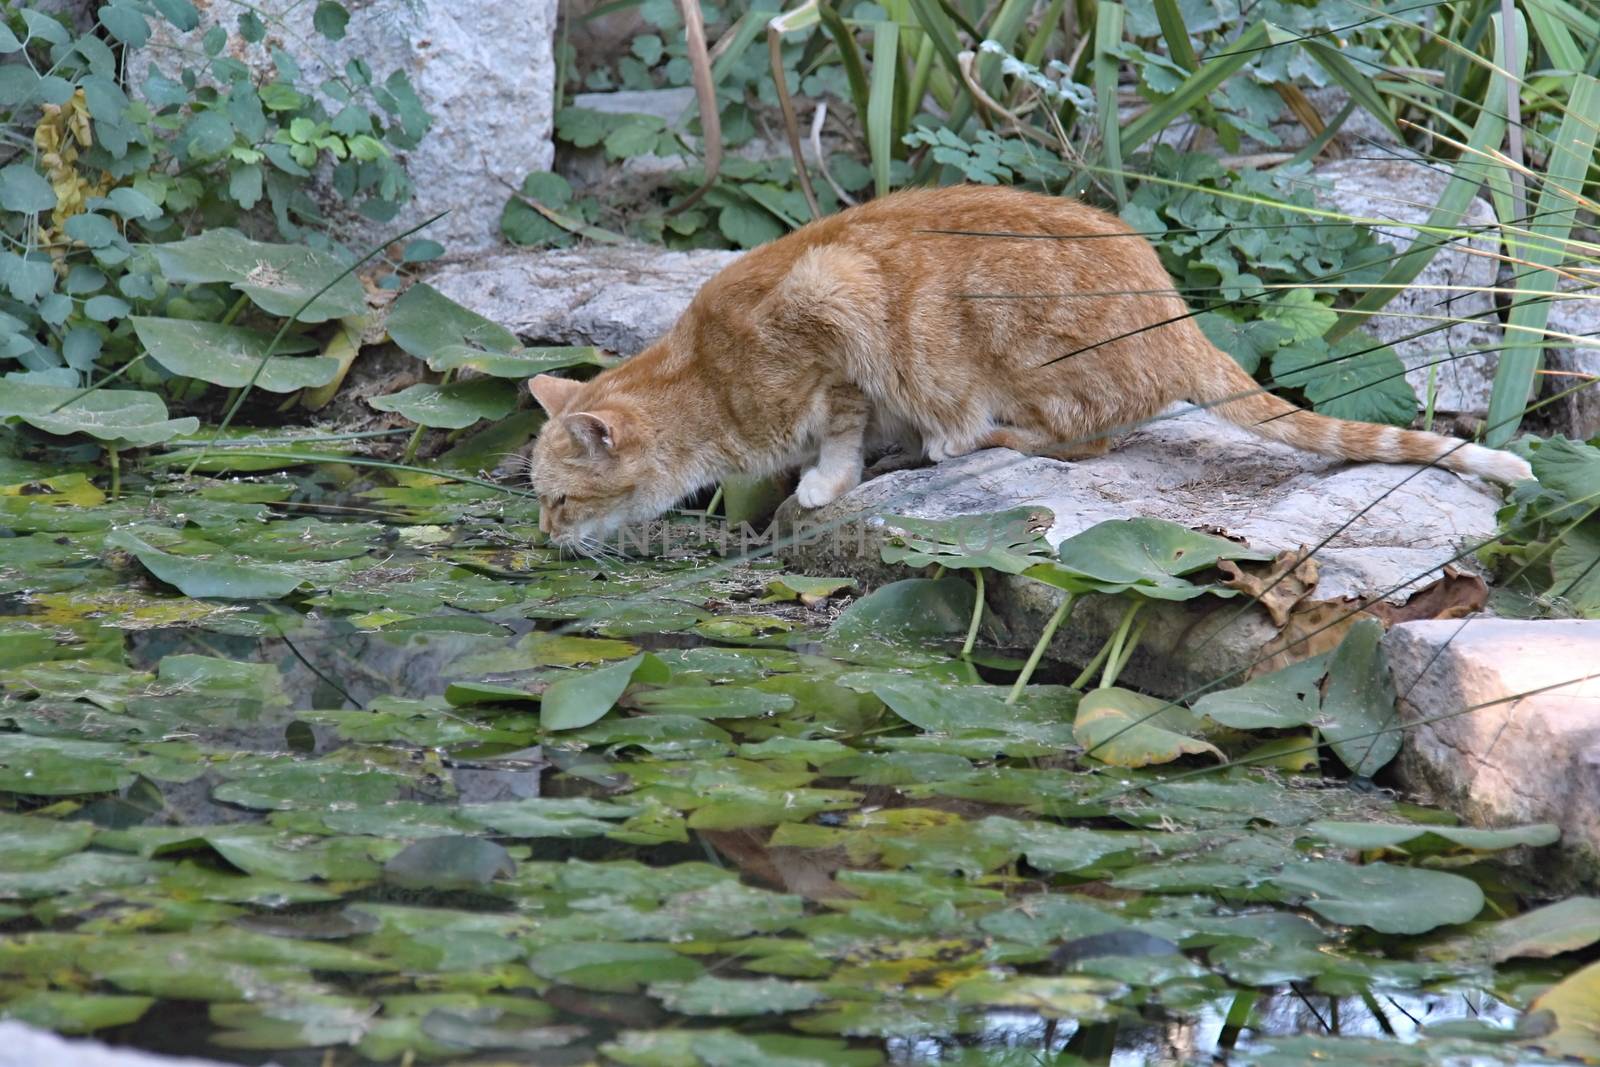 Cat in the City Parc, Valencia, Spain by Dermot68